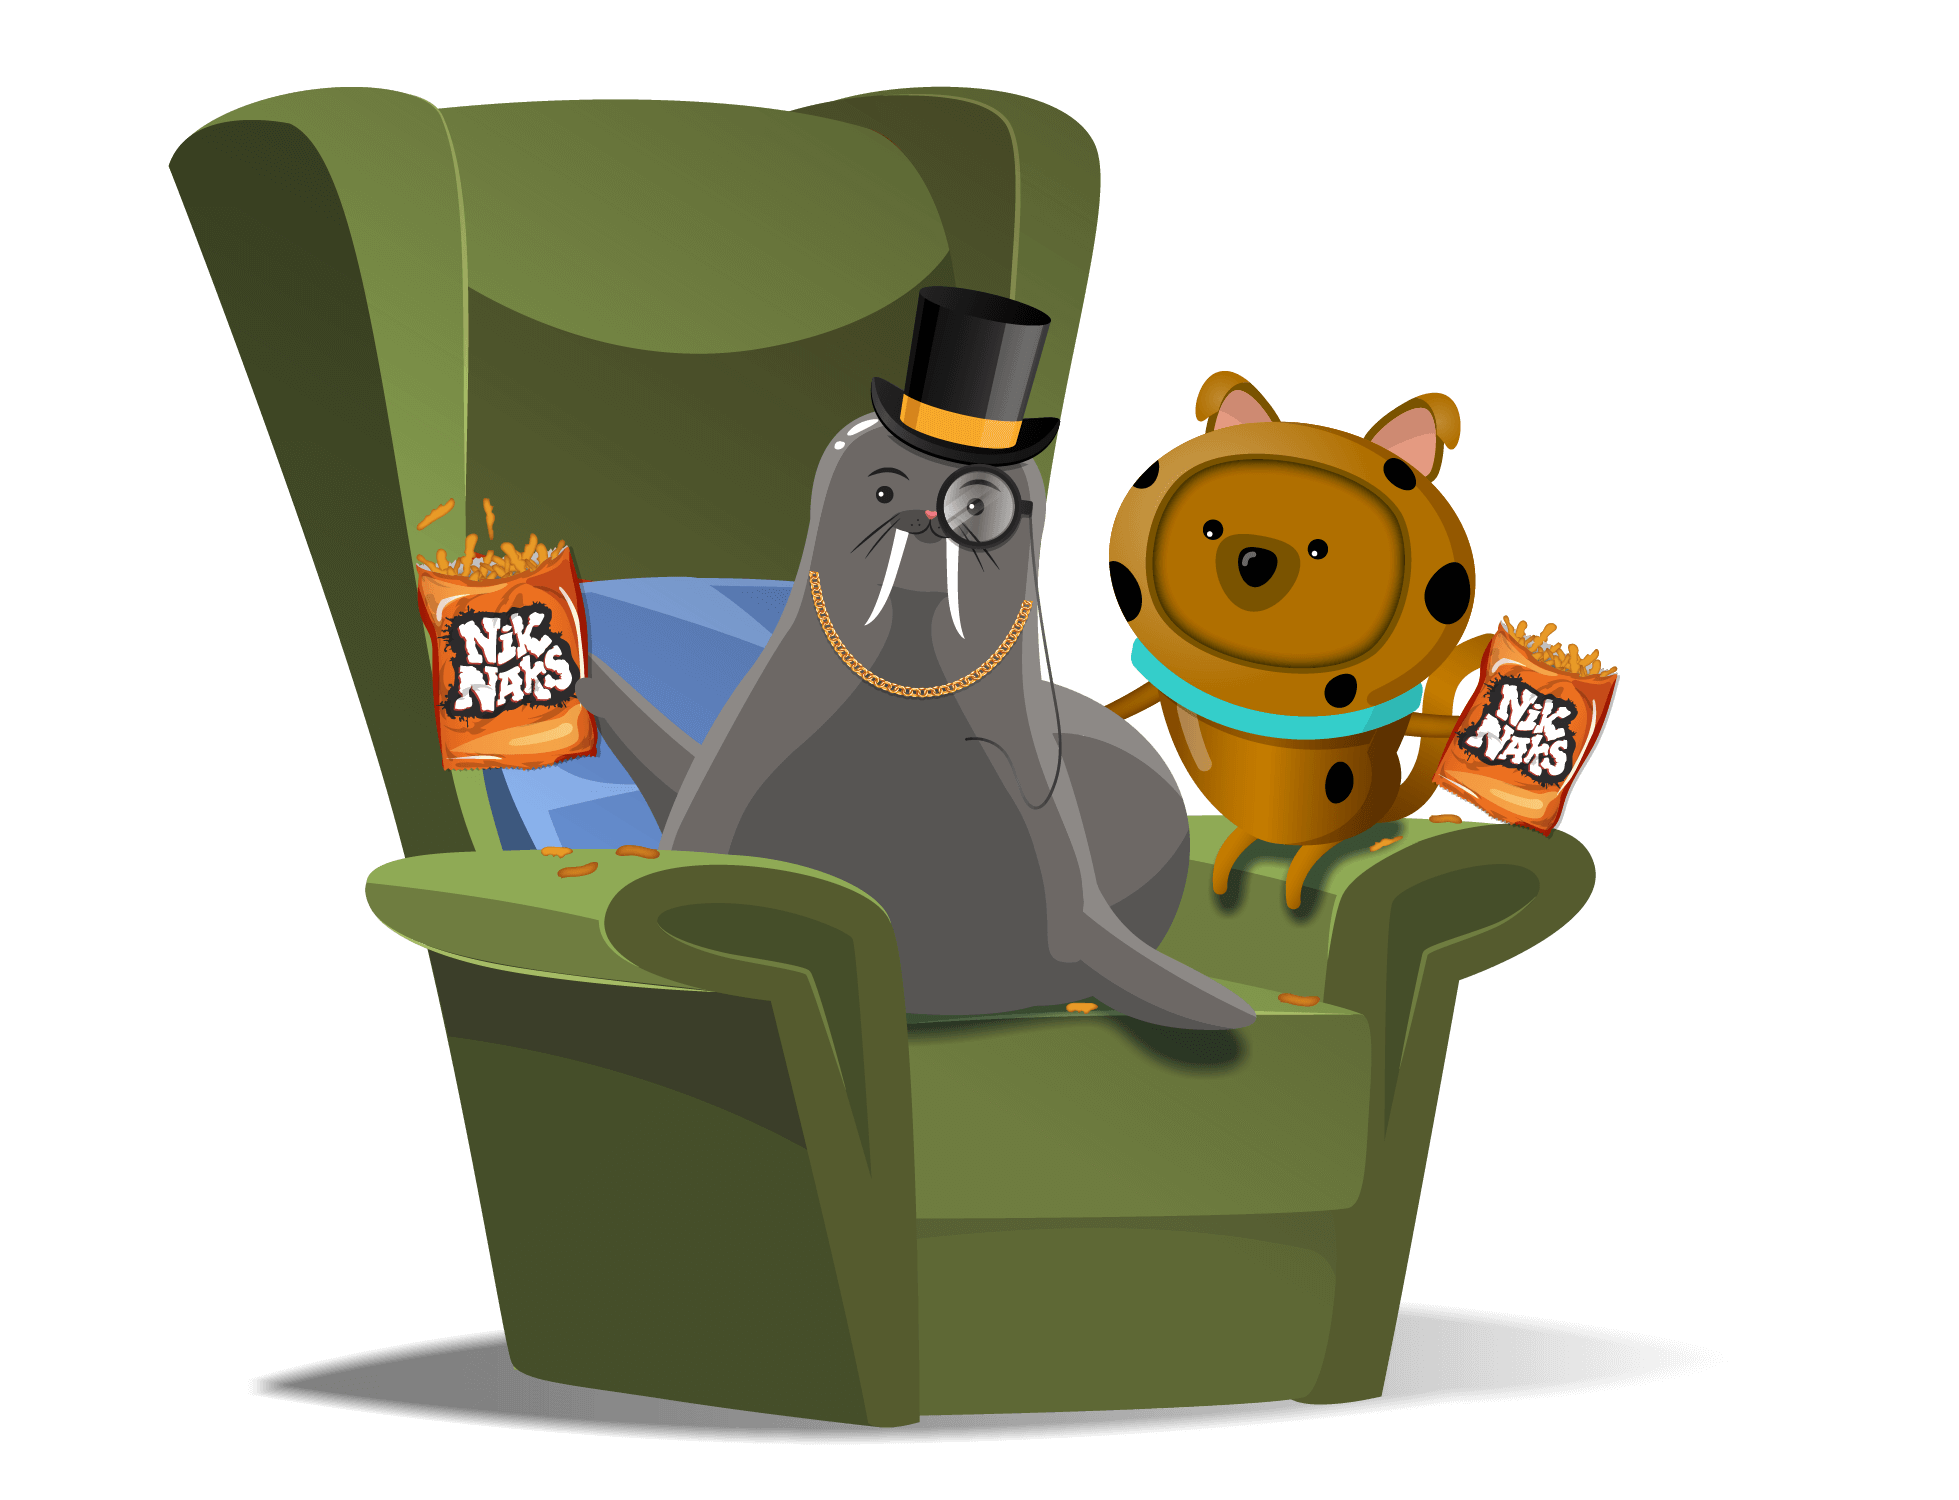 A seal character with a top hat next to a character dressed up as a dog on an armchair